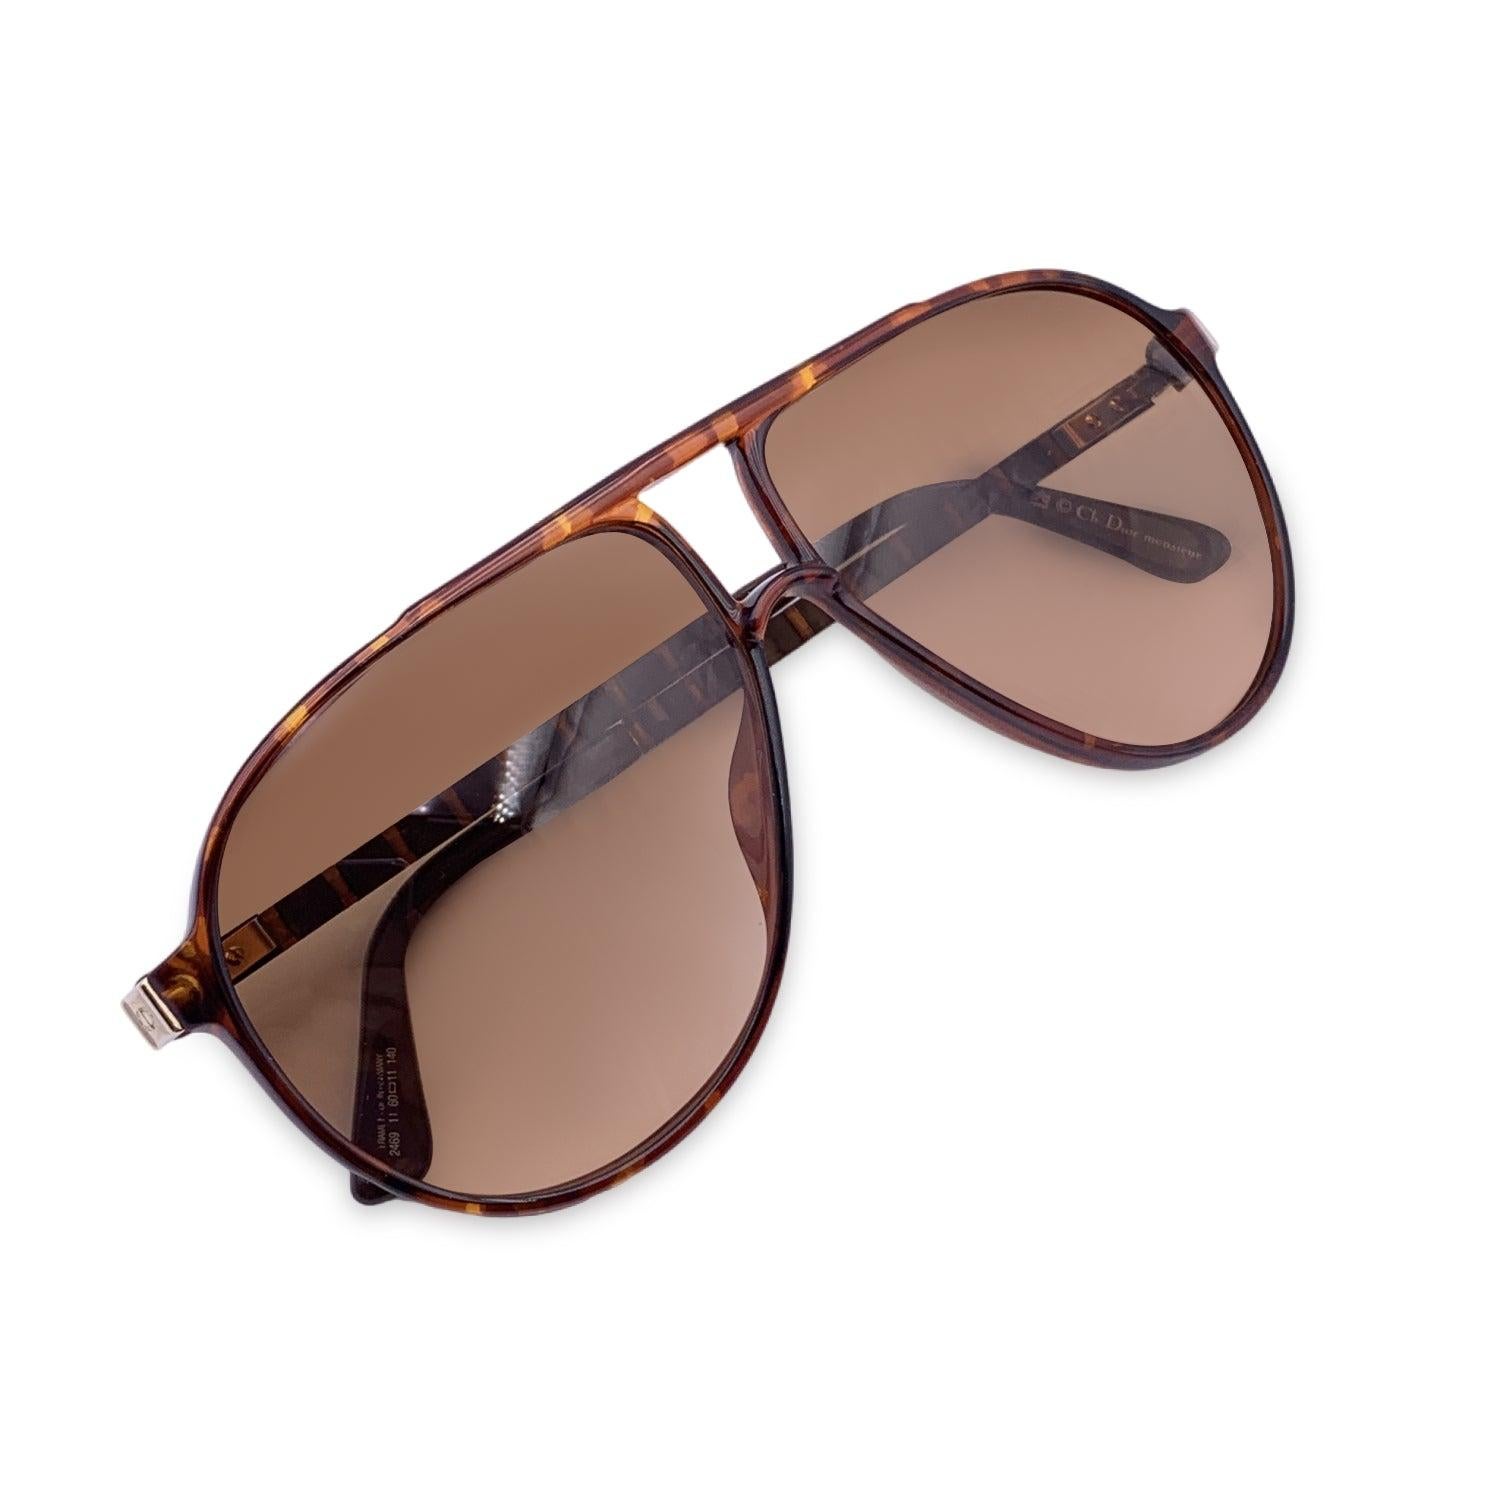 Vintage Christian Dior Monsieur Unisex Sunglasses from 1988. Mod. 2469 11 Size 60/11 140mm. Brown acetate Optyl frame, with gold metal finish. 100% Total UVA/UVB protection brown gradient lenses. CD logos on the side of the temples. Condition A+ -